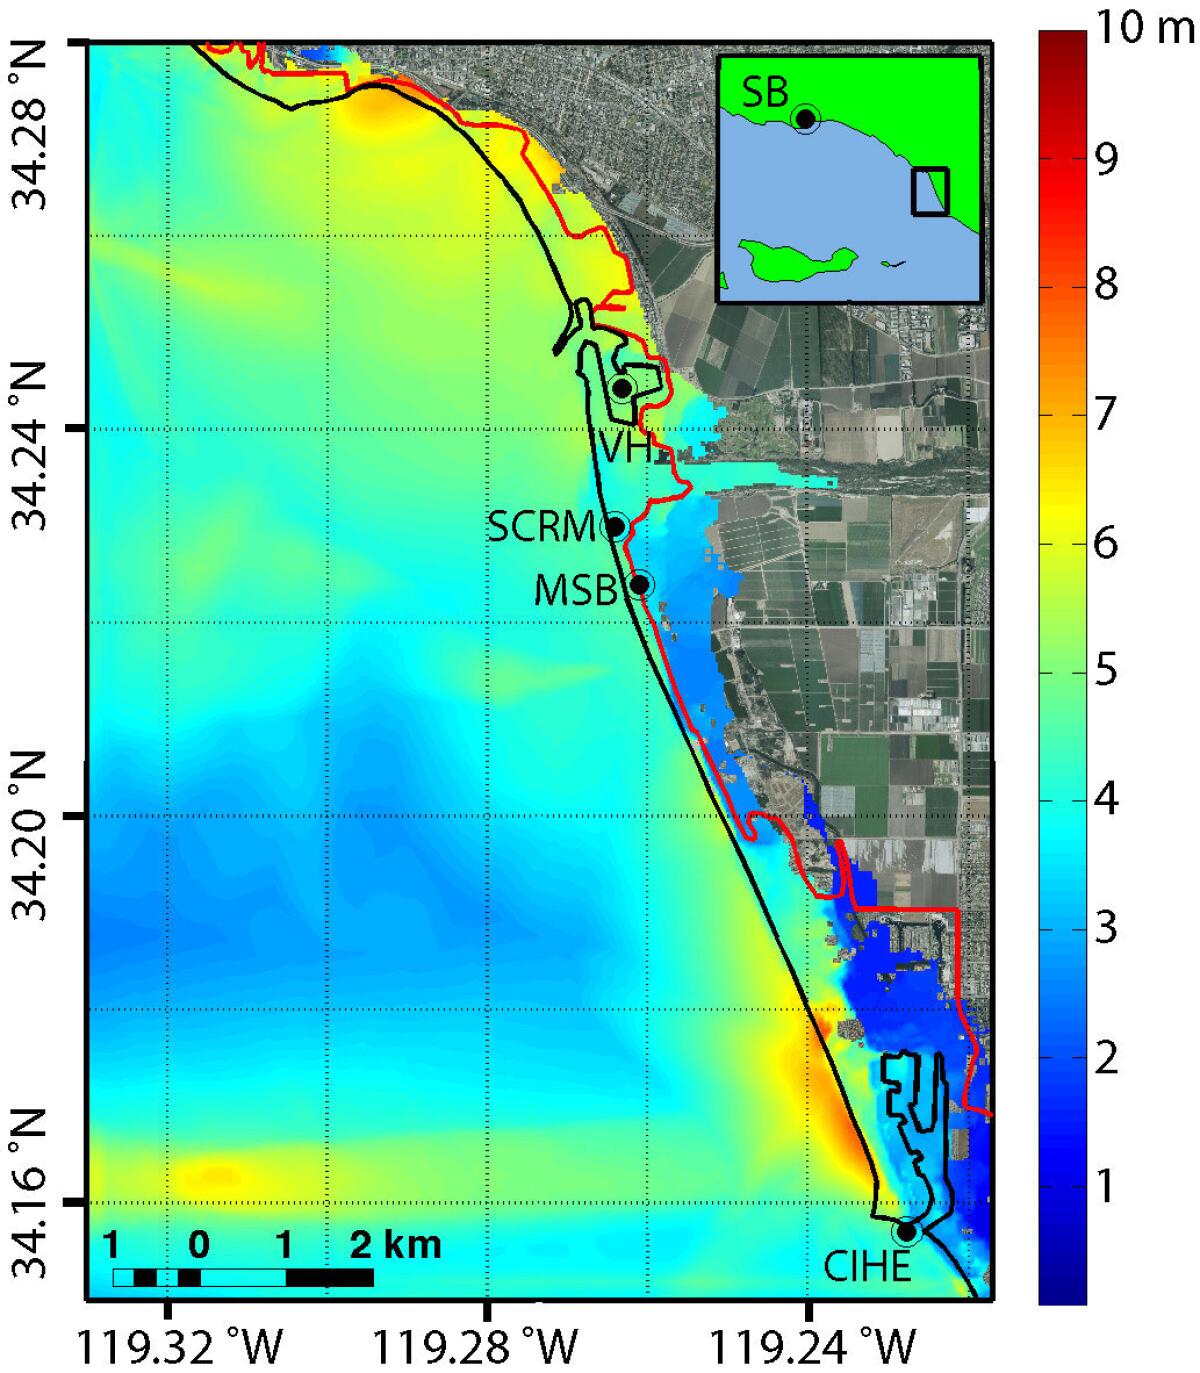 Map of tsunami heights in meters resulting from an earthquake on the Pitas Point and Lower Red Mountain fault system near Ventura, Calif. The solid black line indicates the coastline. The solid red line is the statewide tsunami inundation map coordinated by the California Emergency Management Agency. Key: SB = Santa Barbara; VH = Ventura Harbor; SCRM = Santa Clara River Mouth; MSB = McGrath State Beach; CIHE = Channel Islands Harbor Entrance. Note that inundation from the model is significantly greater in many places than the statewide estimate.